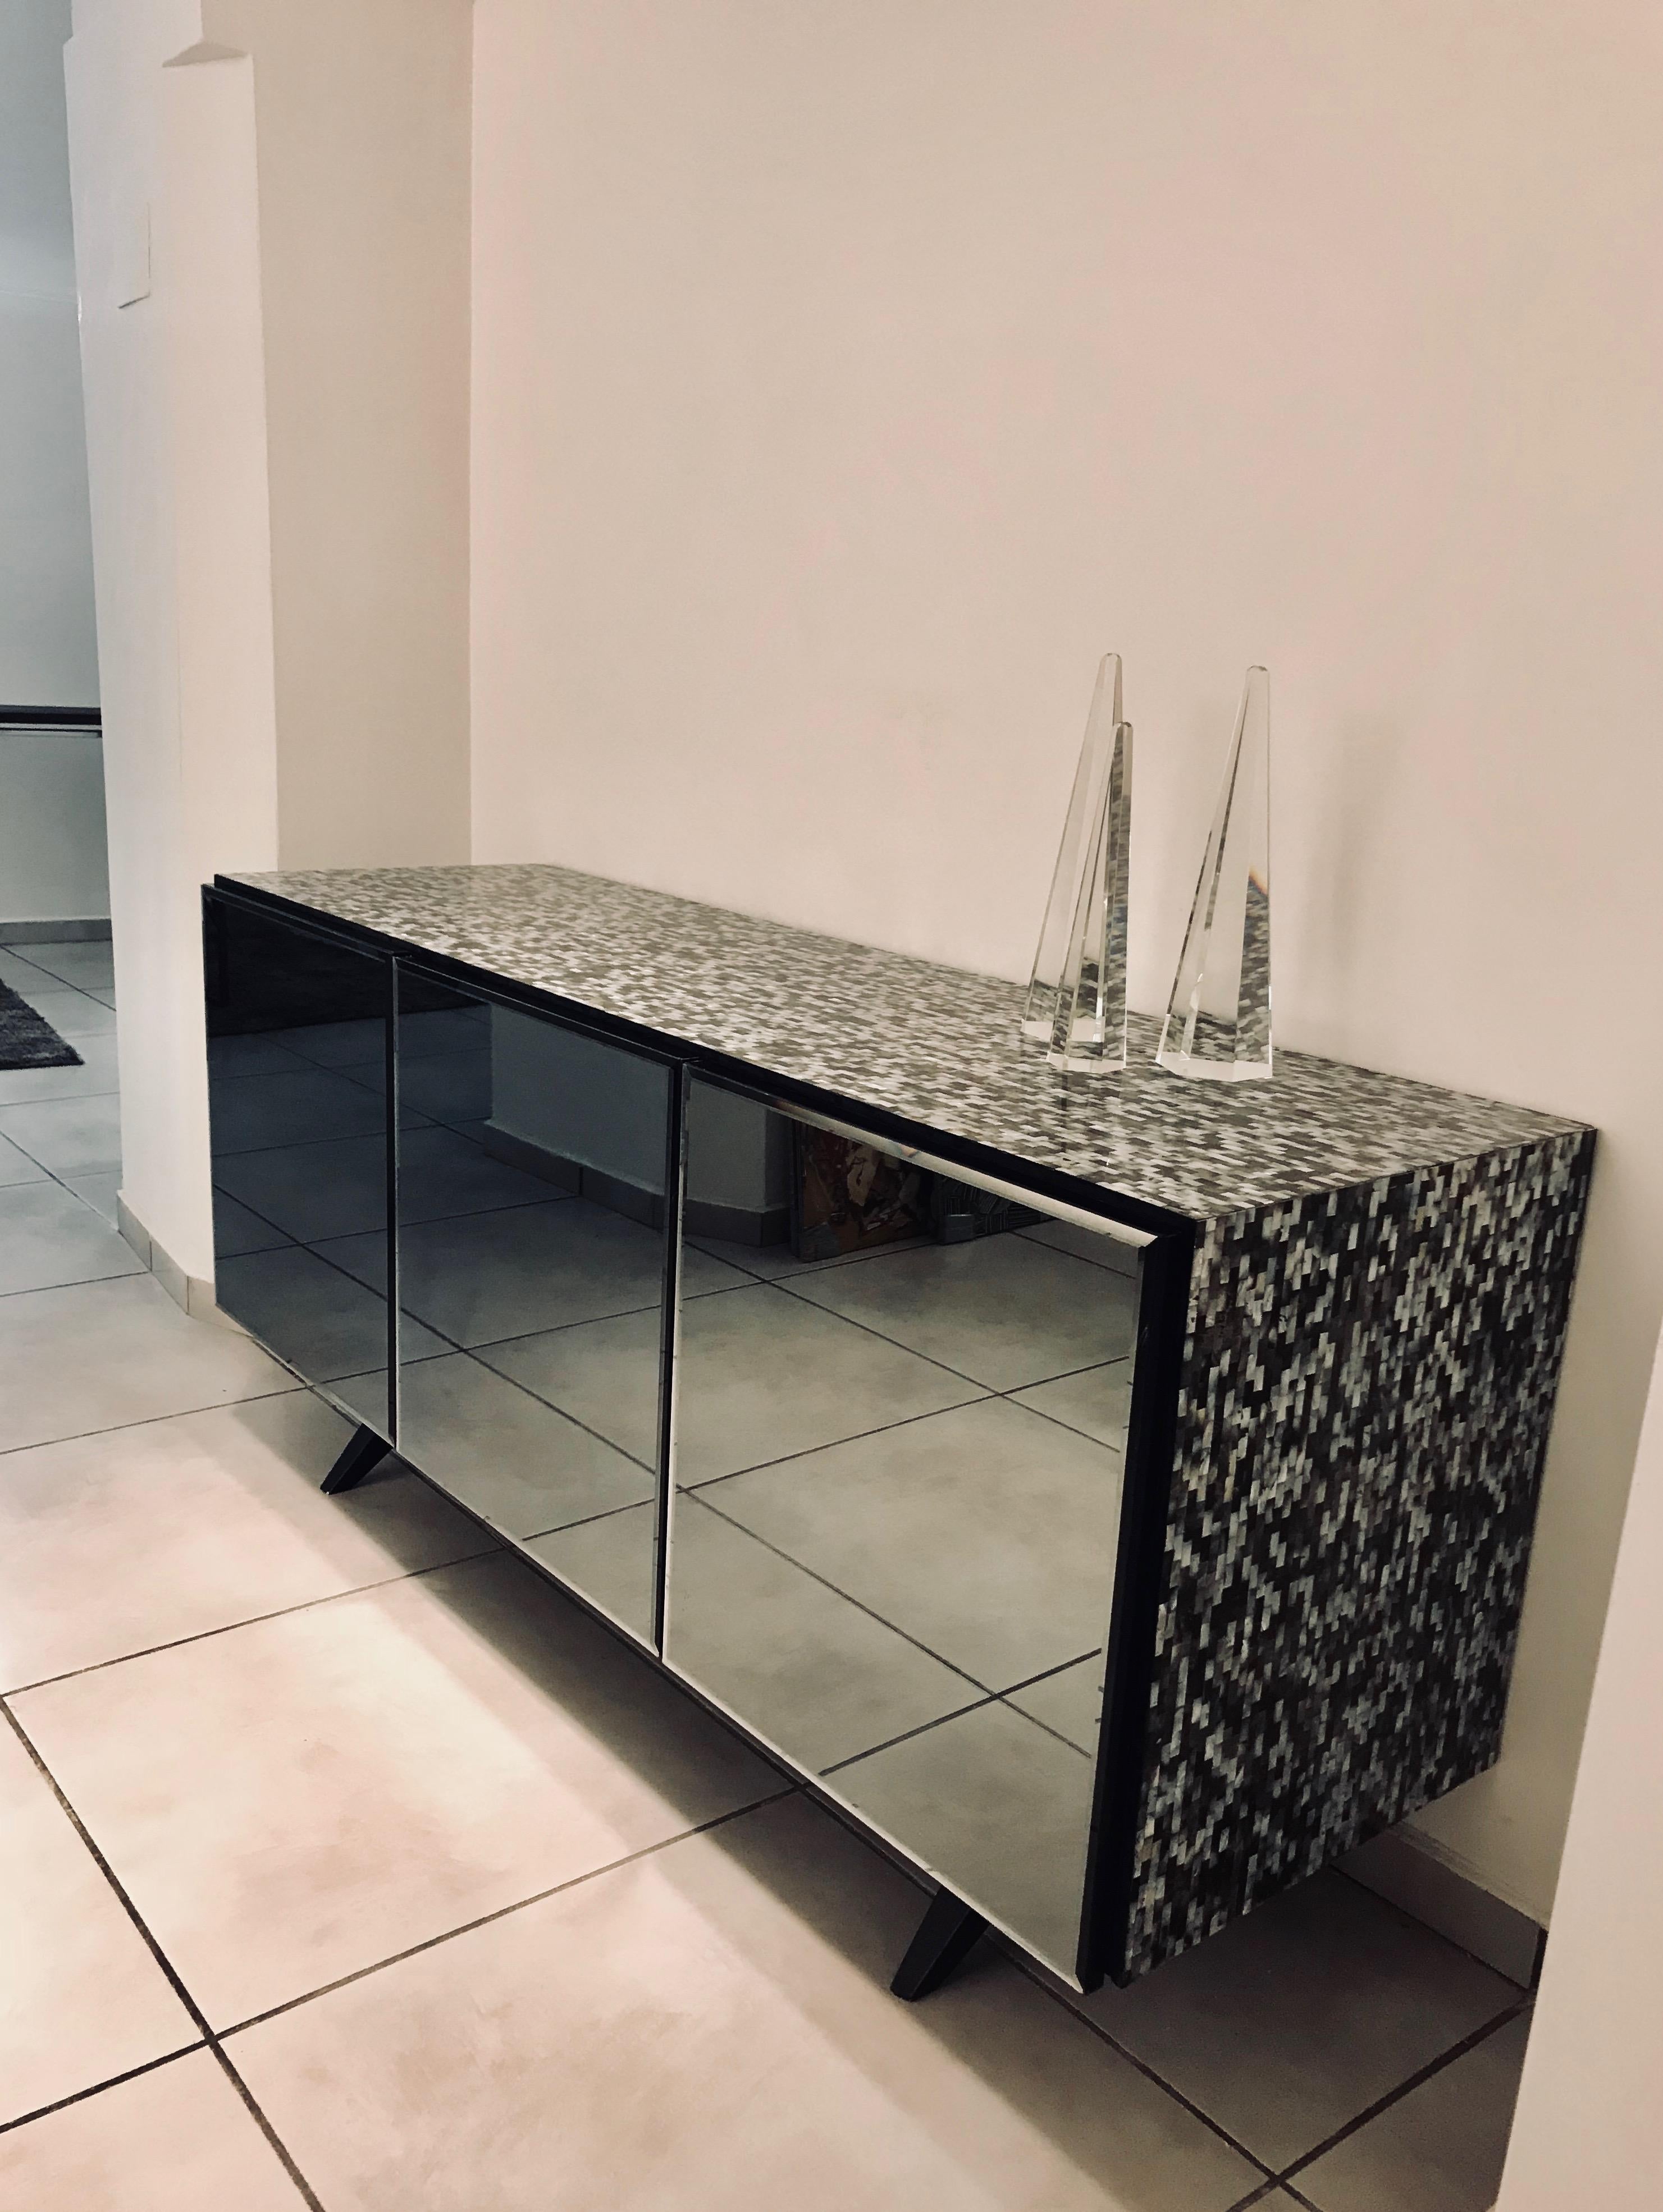 The 'Madrid' mother of pearl sideboard table is a contemporary high-end and beautifully composed piece.

Its design makes a bold statement with its captivating appearance - clad entirely in mesmerising mother of pearl and with smoked glass mirror